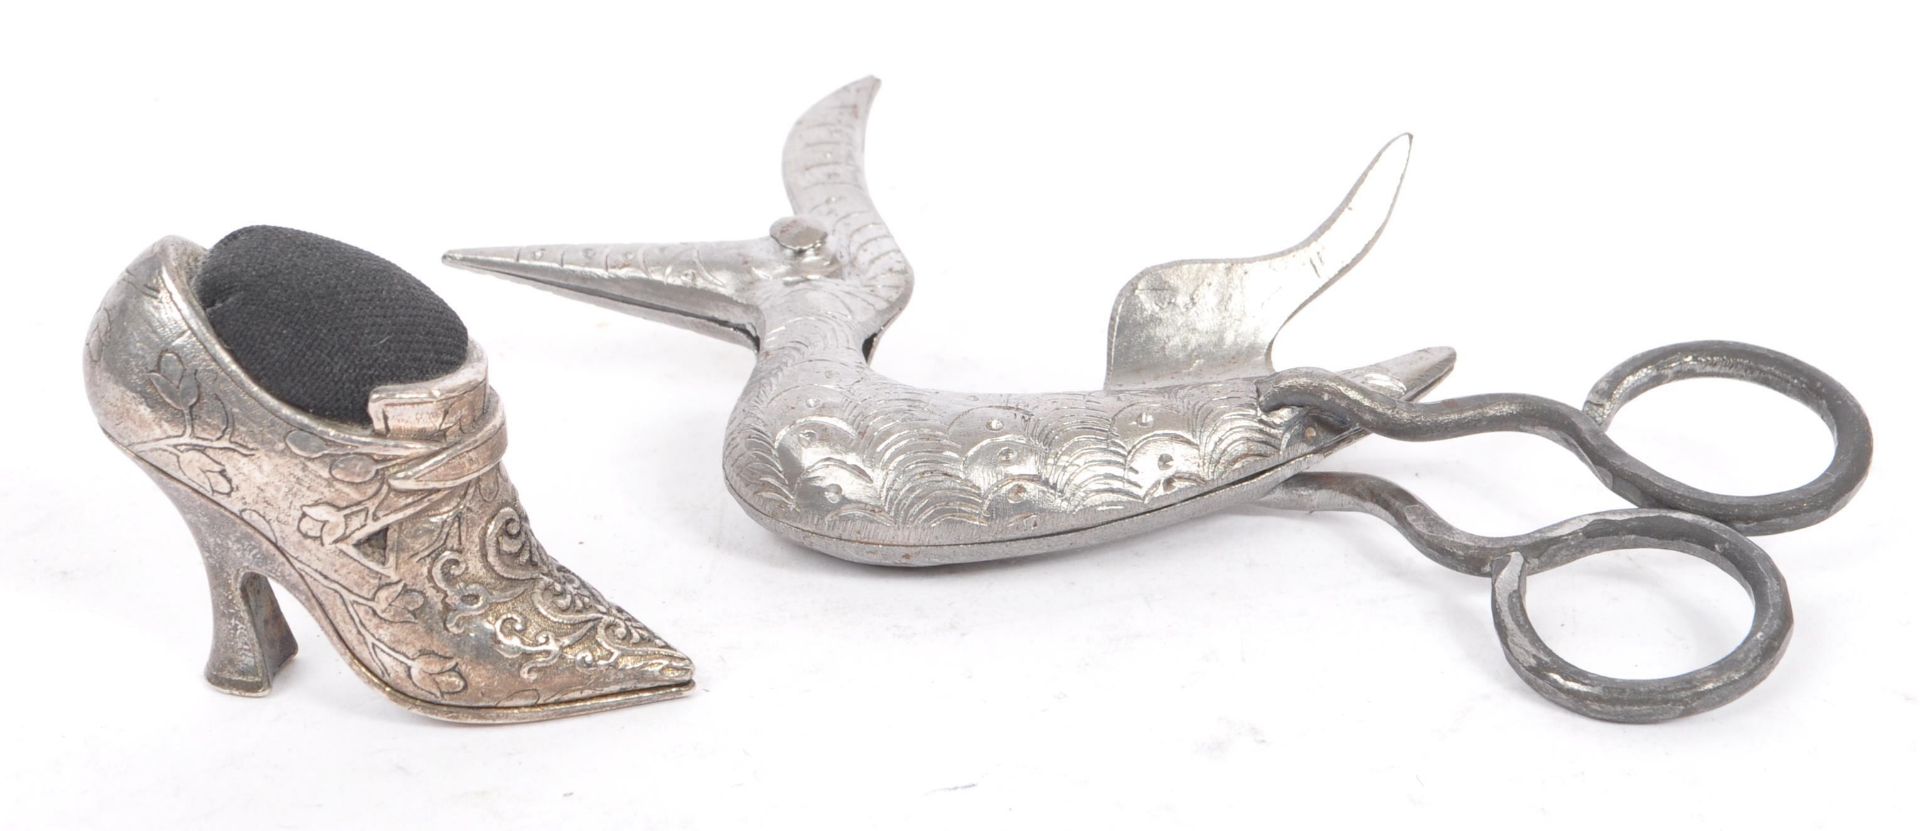 EARLY 20TH CENTURY SILVER PLATED PIN CUSHION & WICK TRIMMERS